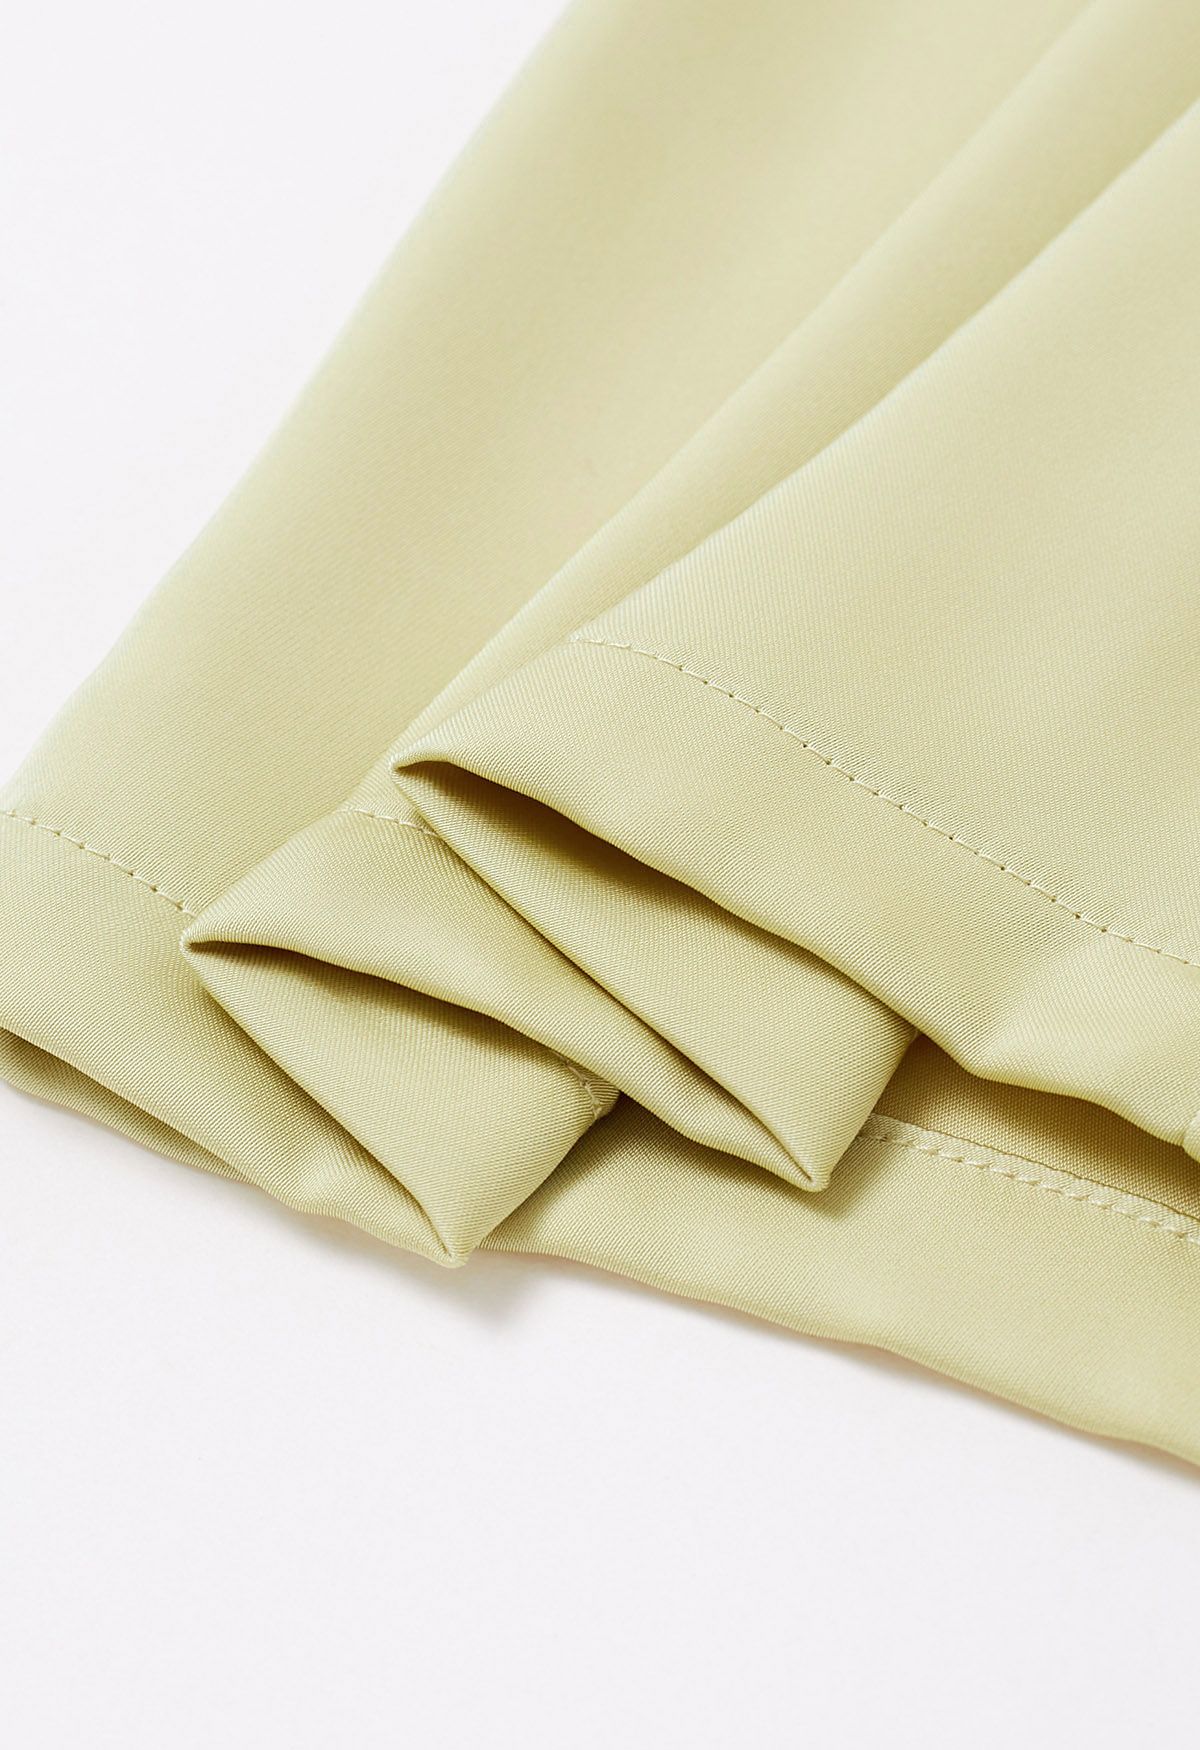 Satin Finish Pull-On Pants in Lime